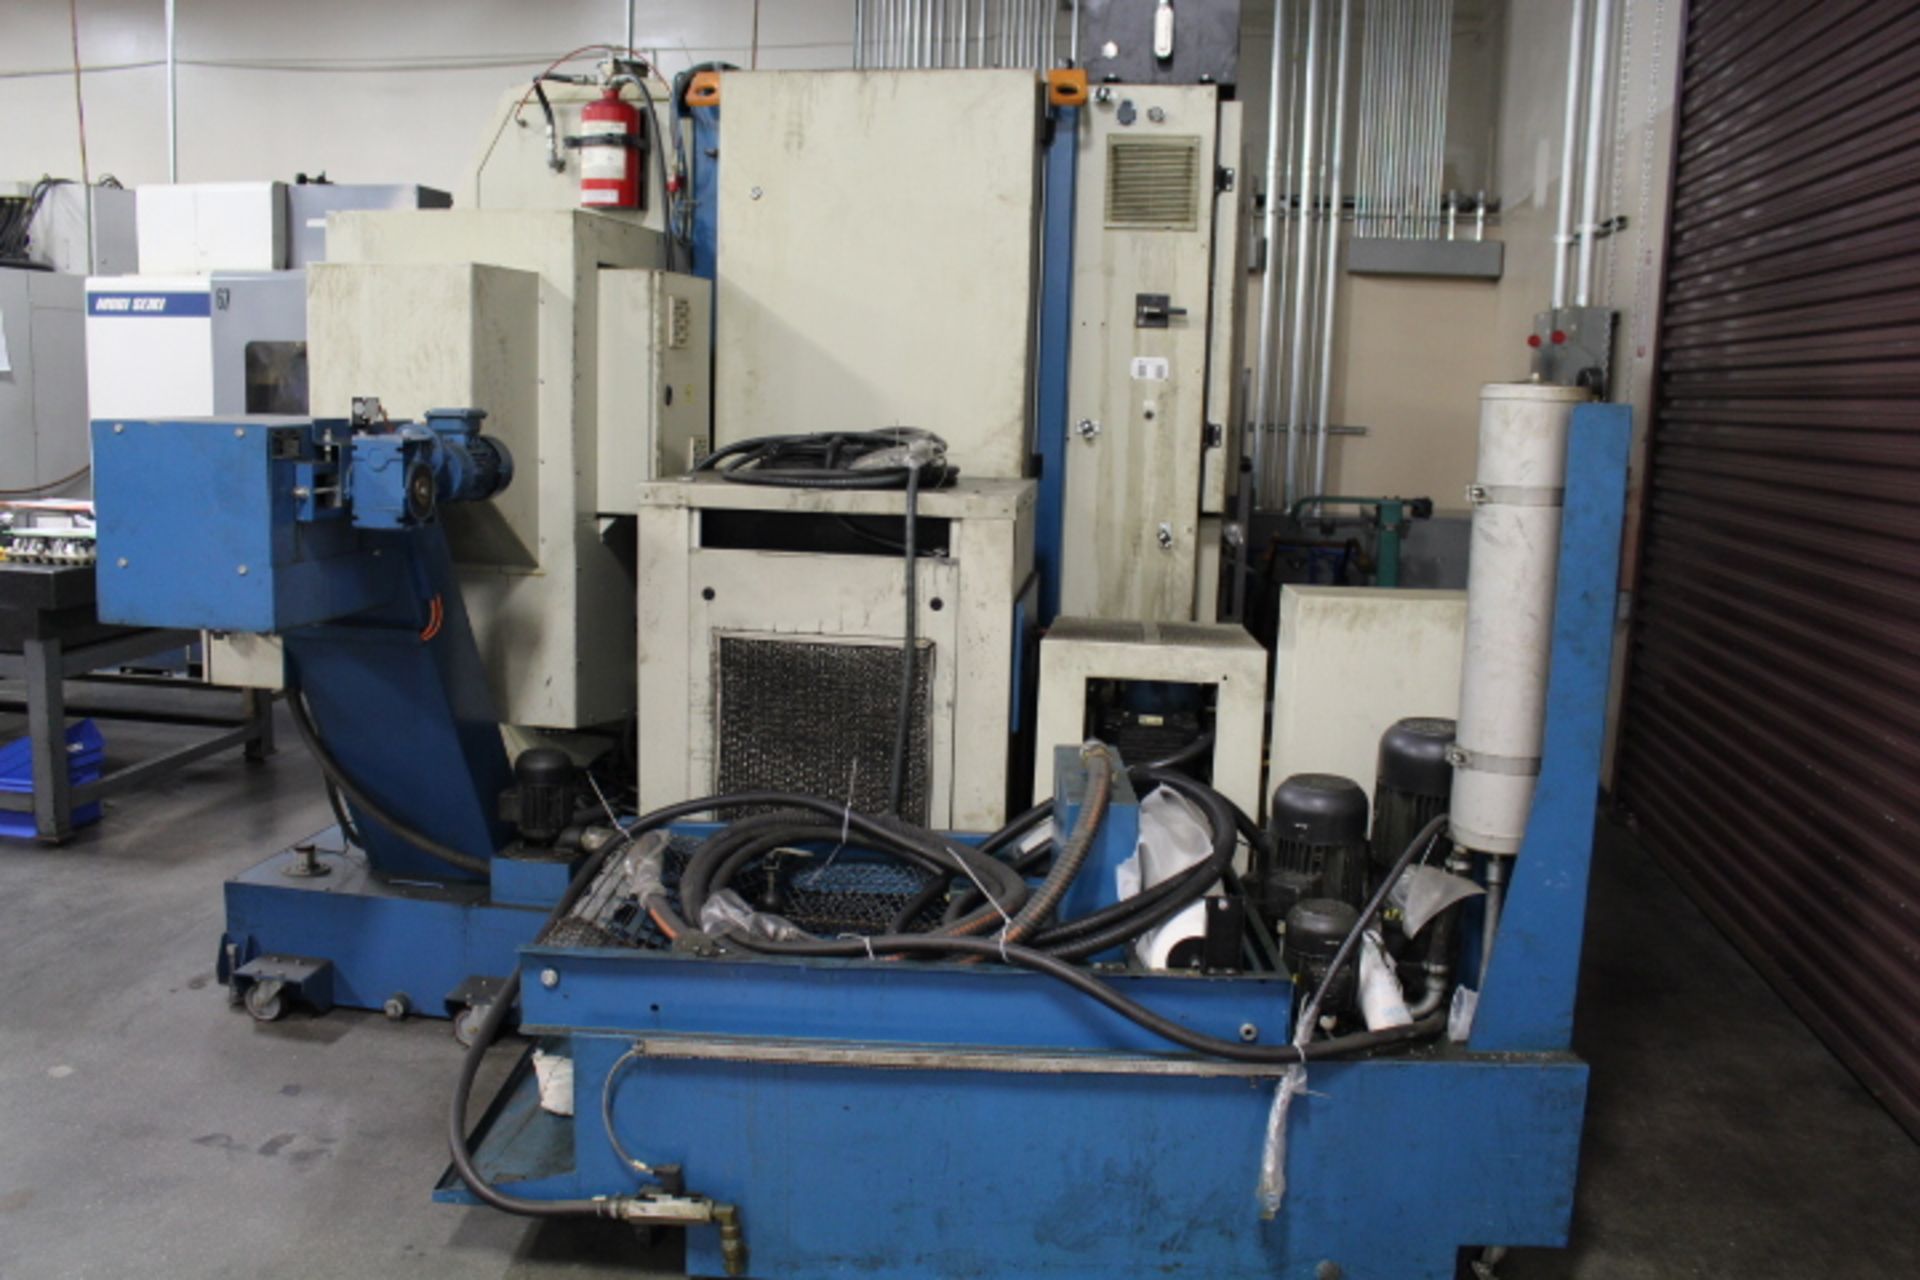 2007 WILLEMIN CNC MILL/TURNING LATHE, MODEL 518MT 7-AXIS, GE SERIES FANUC 16i-MB CNC CONTROL, 72 ATC - Image 16 of 38